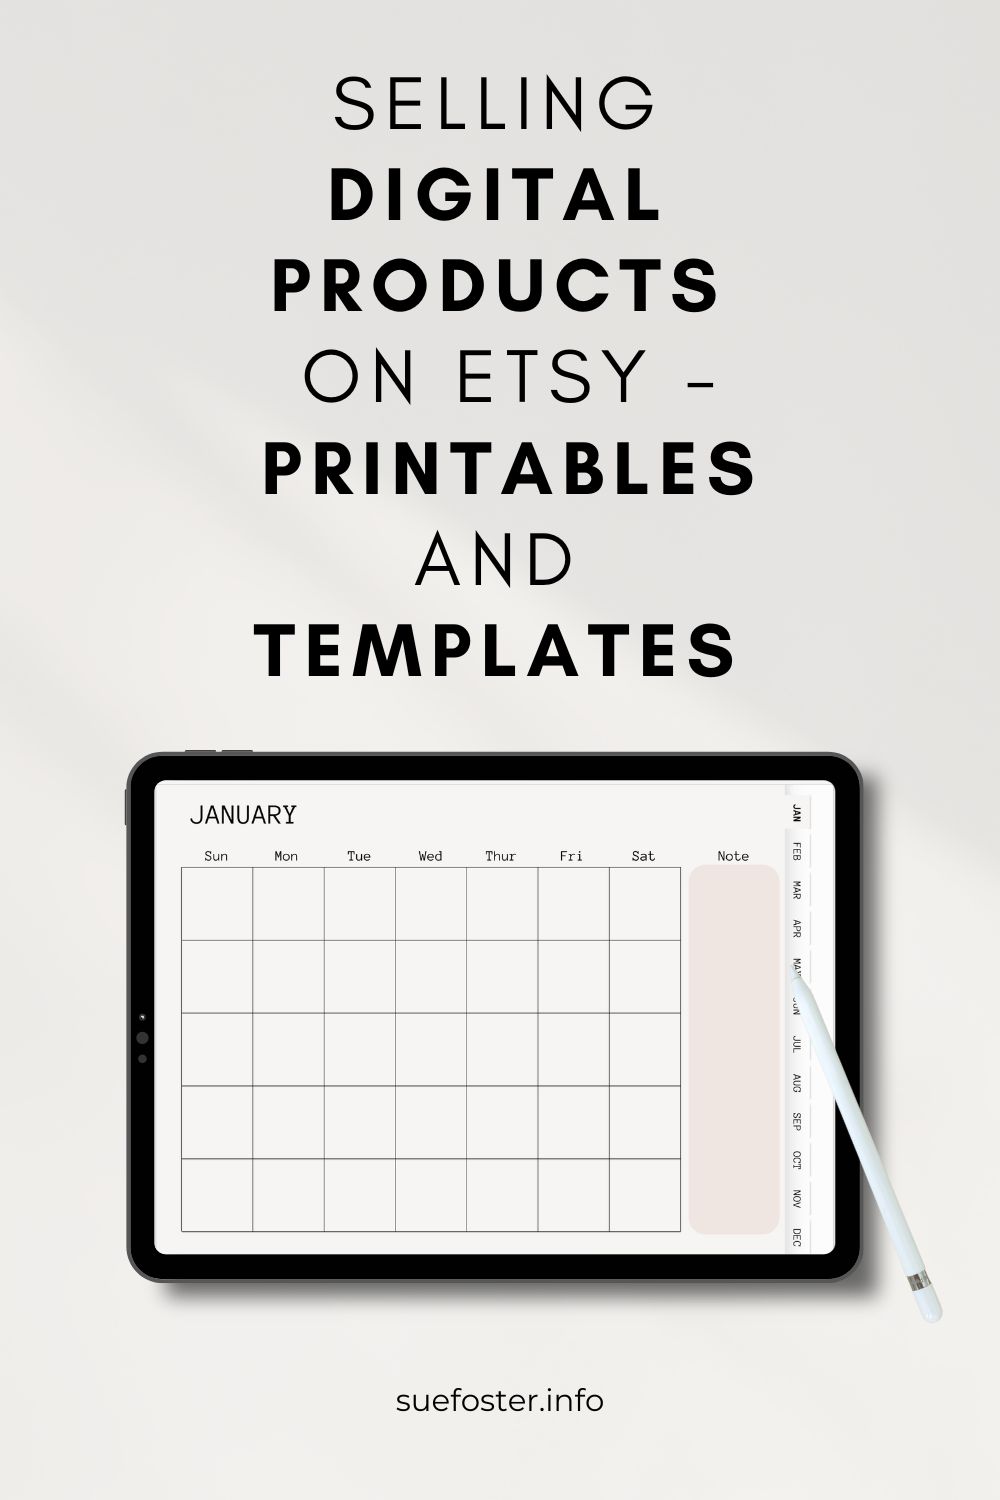 This post covers selling digital products on Etsy. Let’s look at printables and templates, what they are and which is easier to create. 